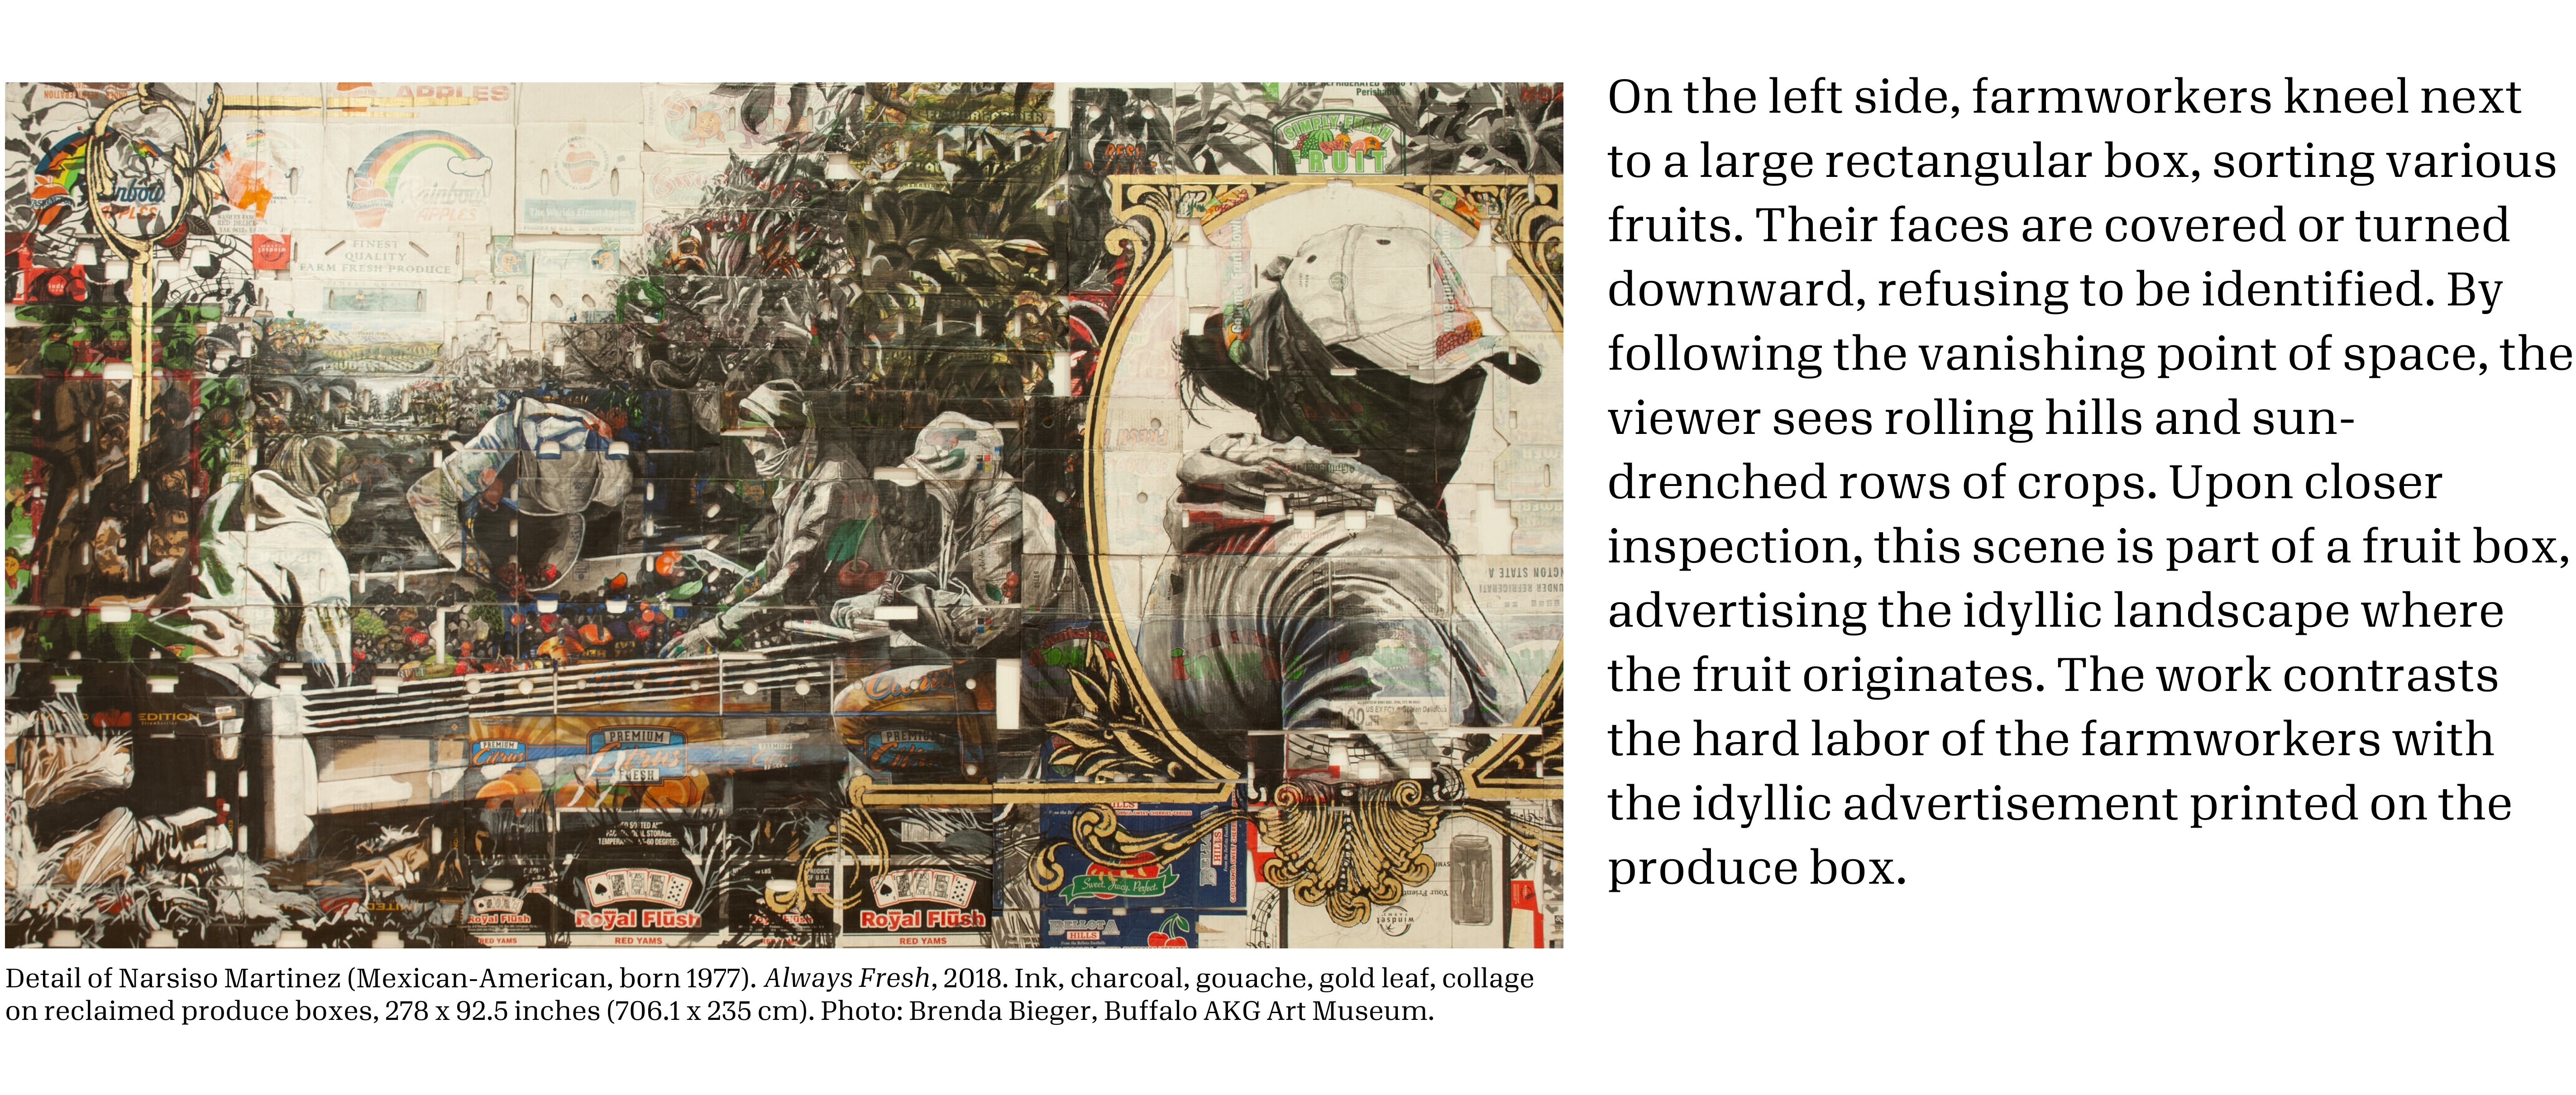 A painting of farmworkers on produce boxes with the caption "Detail of Narsiso Martinez (Mexican-American, born 1977).Always Fresh, 2018. Ink, charcoal, gouache, gold leaf, collage on reclaimed produce boxes, 278 x 92.5 inches (706.1 x 235 cm). Photo: Brenda Bieger, Buffalo AKG Art Museum." and a paragraph to the right stating "On the left side, farmworkers kneel next to a large rectangular box, sorting various fruits. Their faces are covered or turned downward, refusing to be identified. By following the vanishing point of space, the viewer sees rolling hills and sun-drenched rows of crops. Upon closer inspection, this scene is part of a fruit box, advertising the idyllic landscape where the fruit originates. The work contrasts the hard labor of the farmworkers with the idyllic advertisement printed on the produce box."